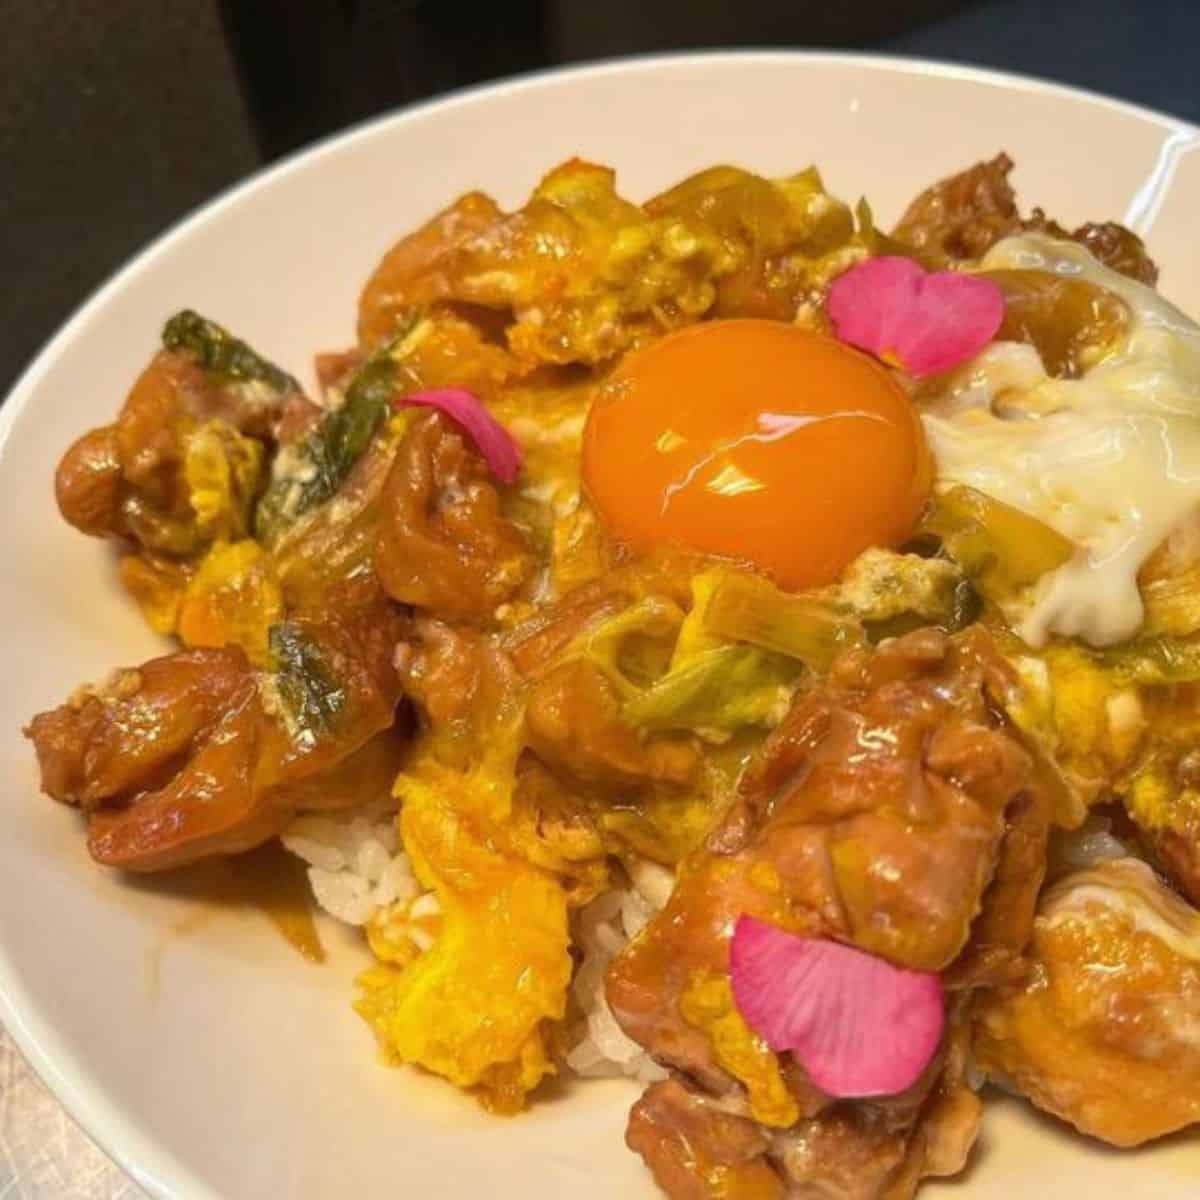 Beautiful Oyakodon plating with fresh egg yolk in the middle and pink flower petals as decor